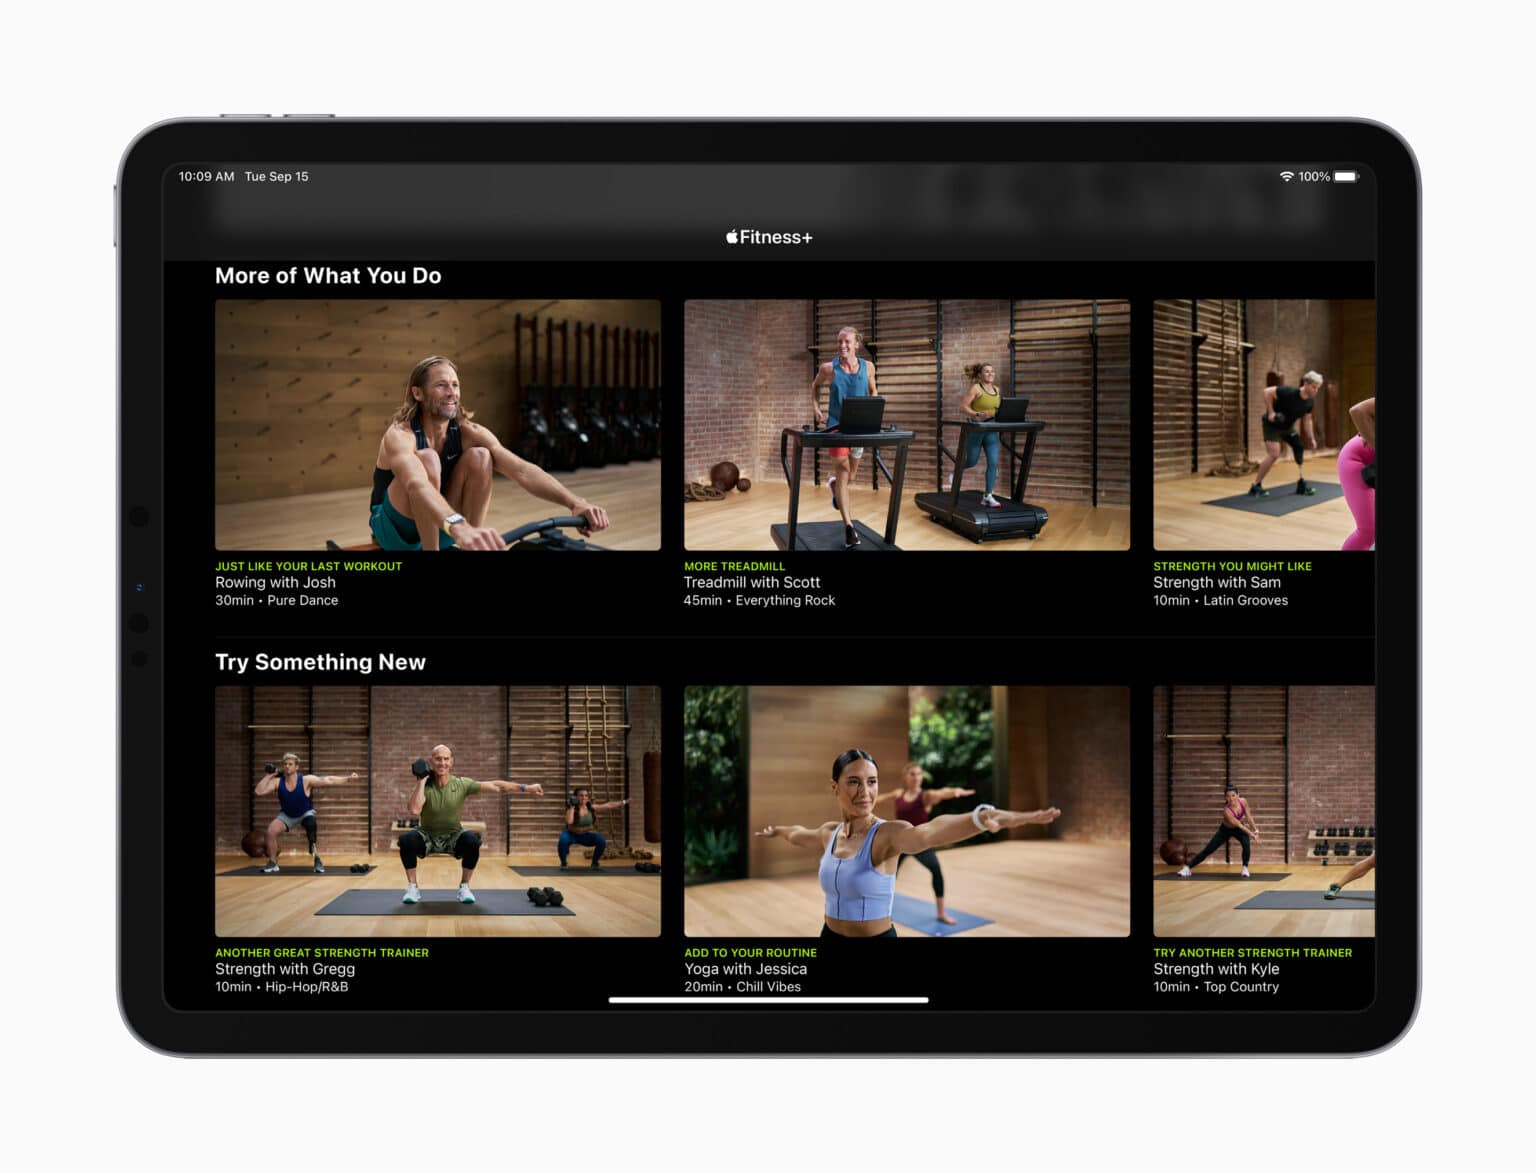 Apple Watch is key to the new Apple Fitness+ subscription service.